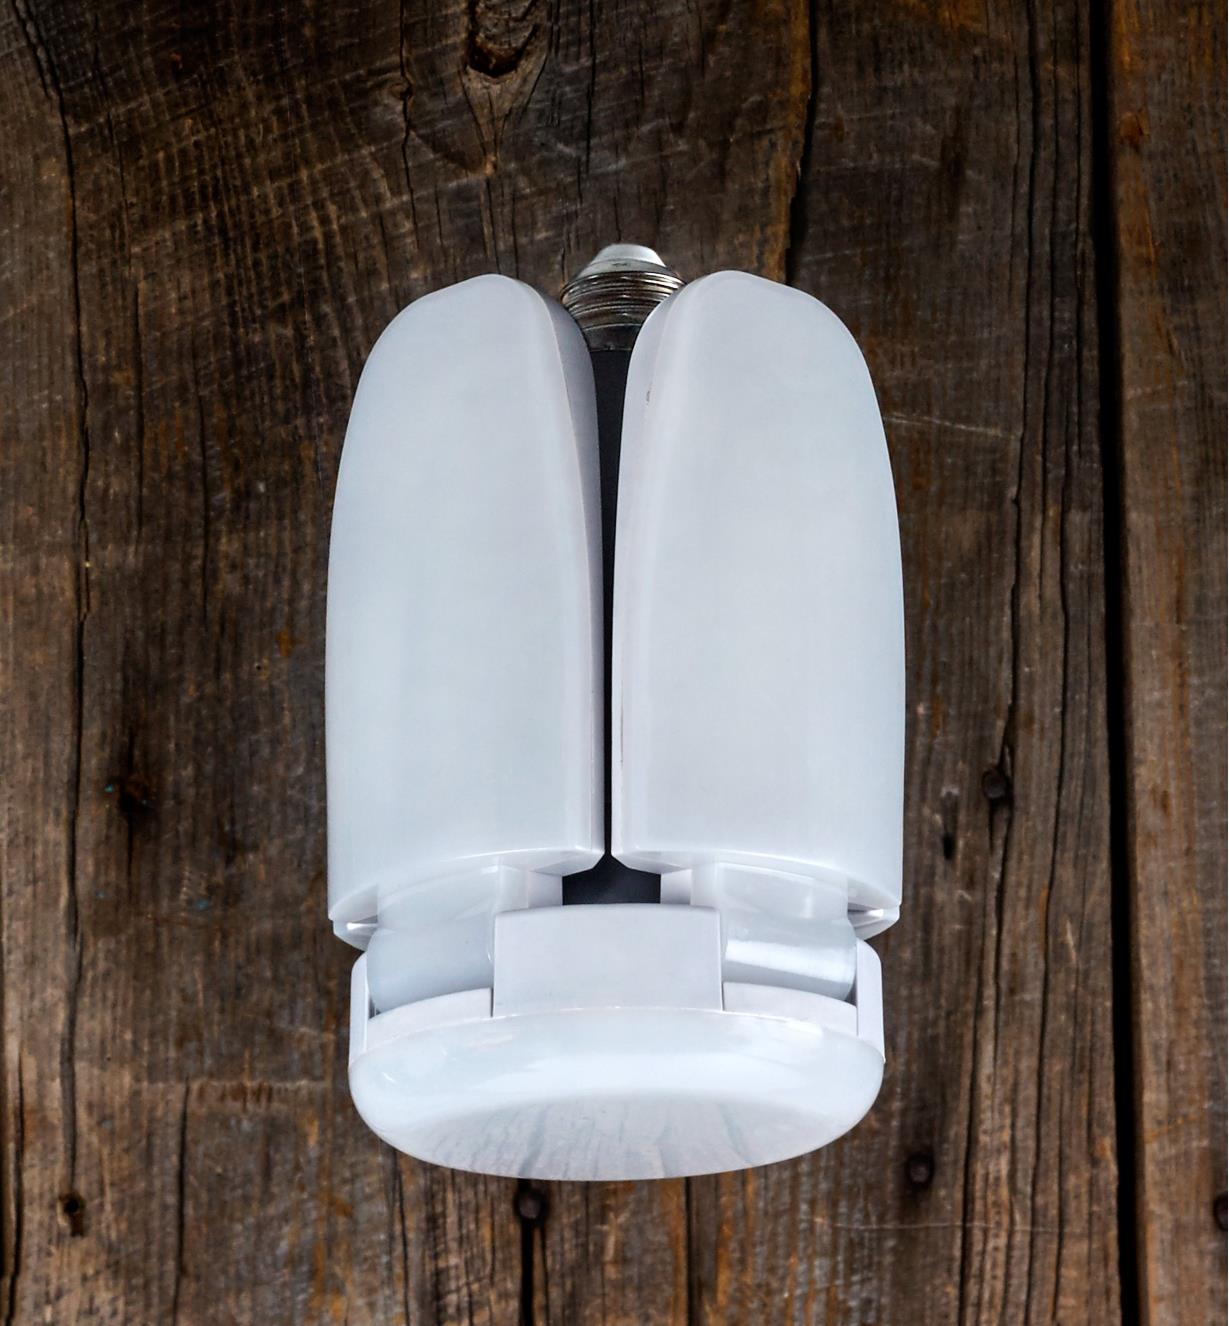 A directional LED ceiling light with its arms fully raised to cast light far out to the sides